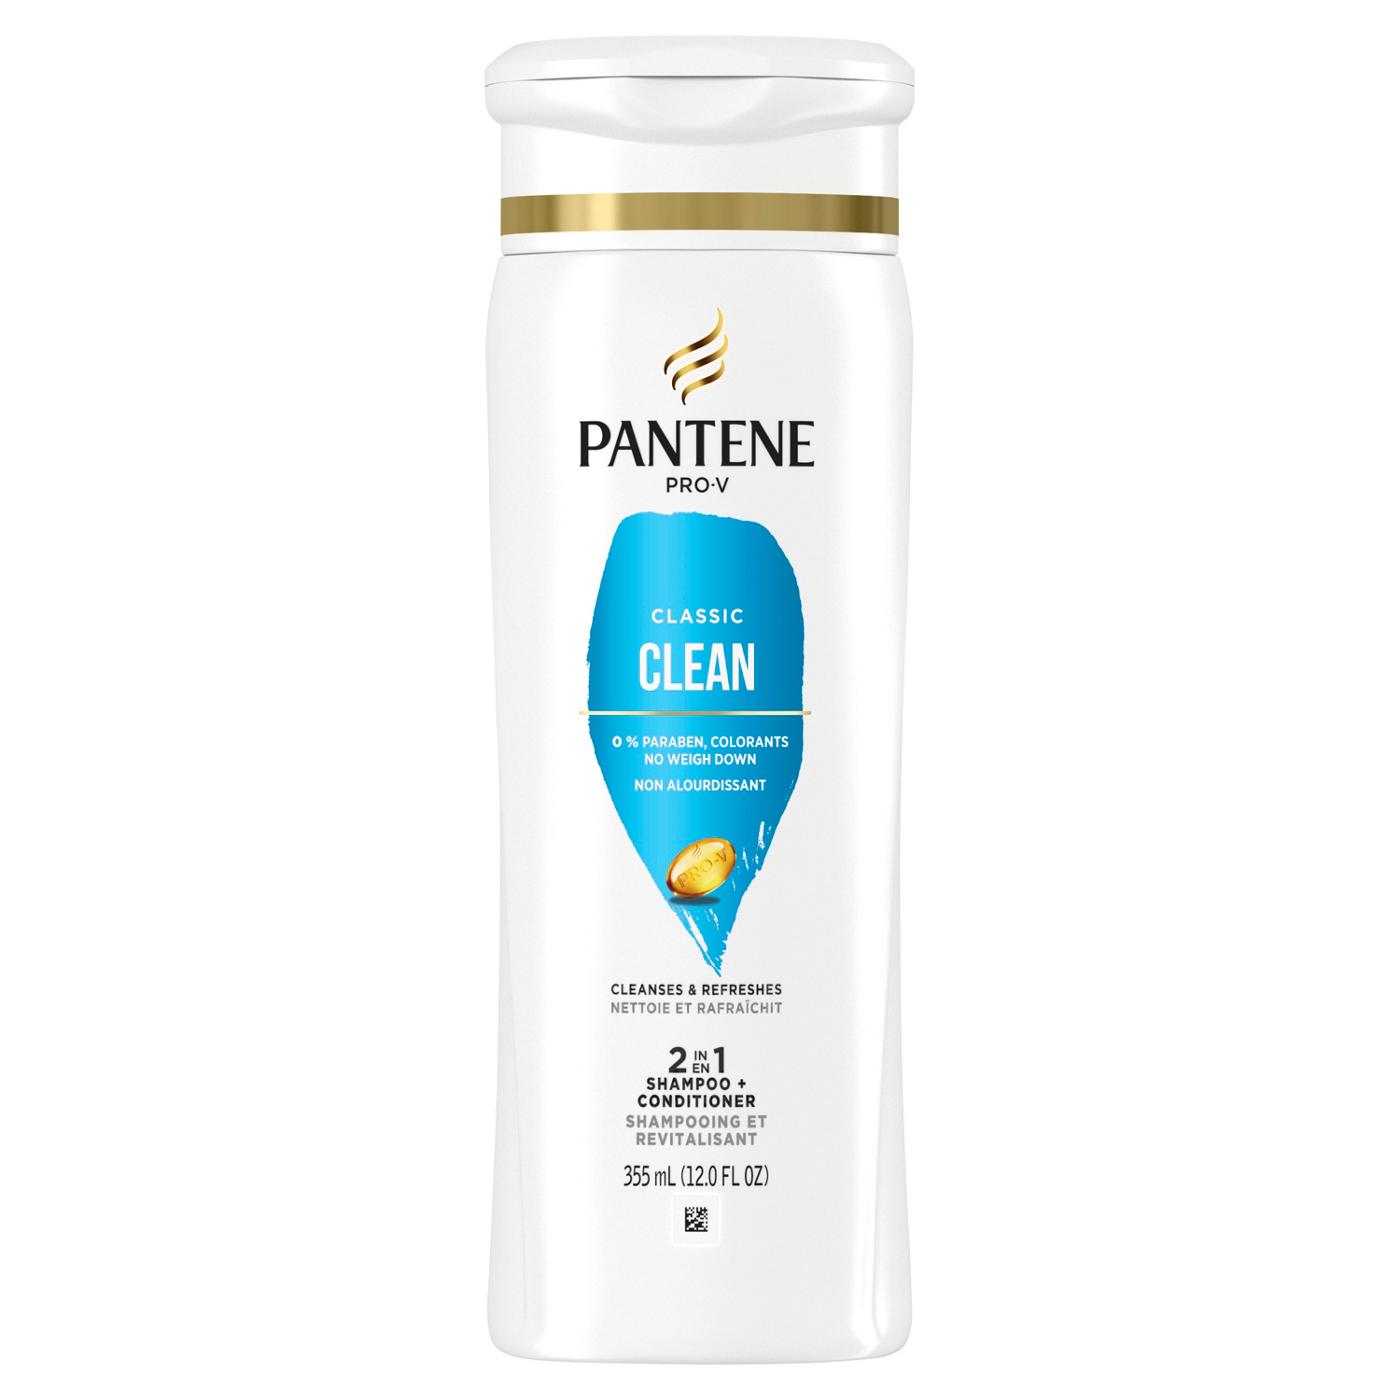 Pantene Pro-V Classic Clean 2 in 1 Shampoo + Conditioner; image 1 of 8